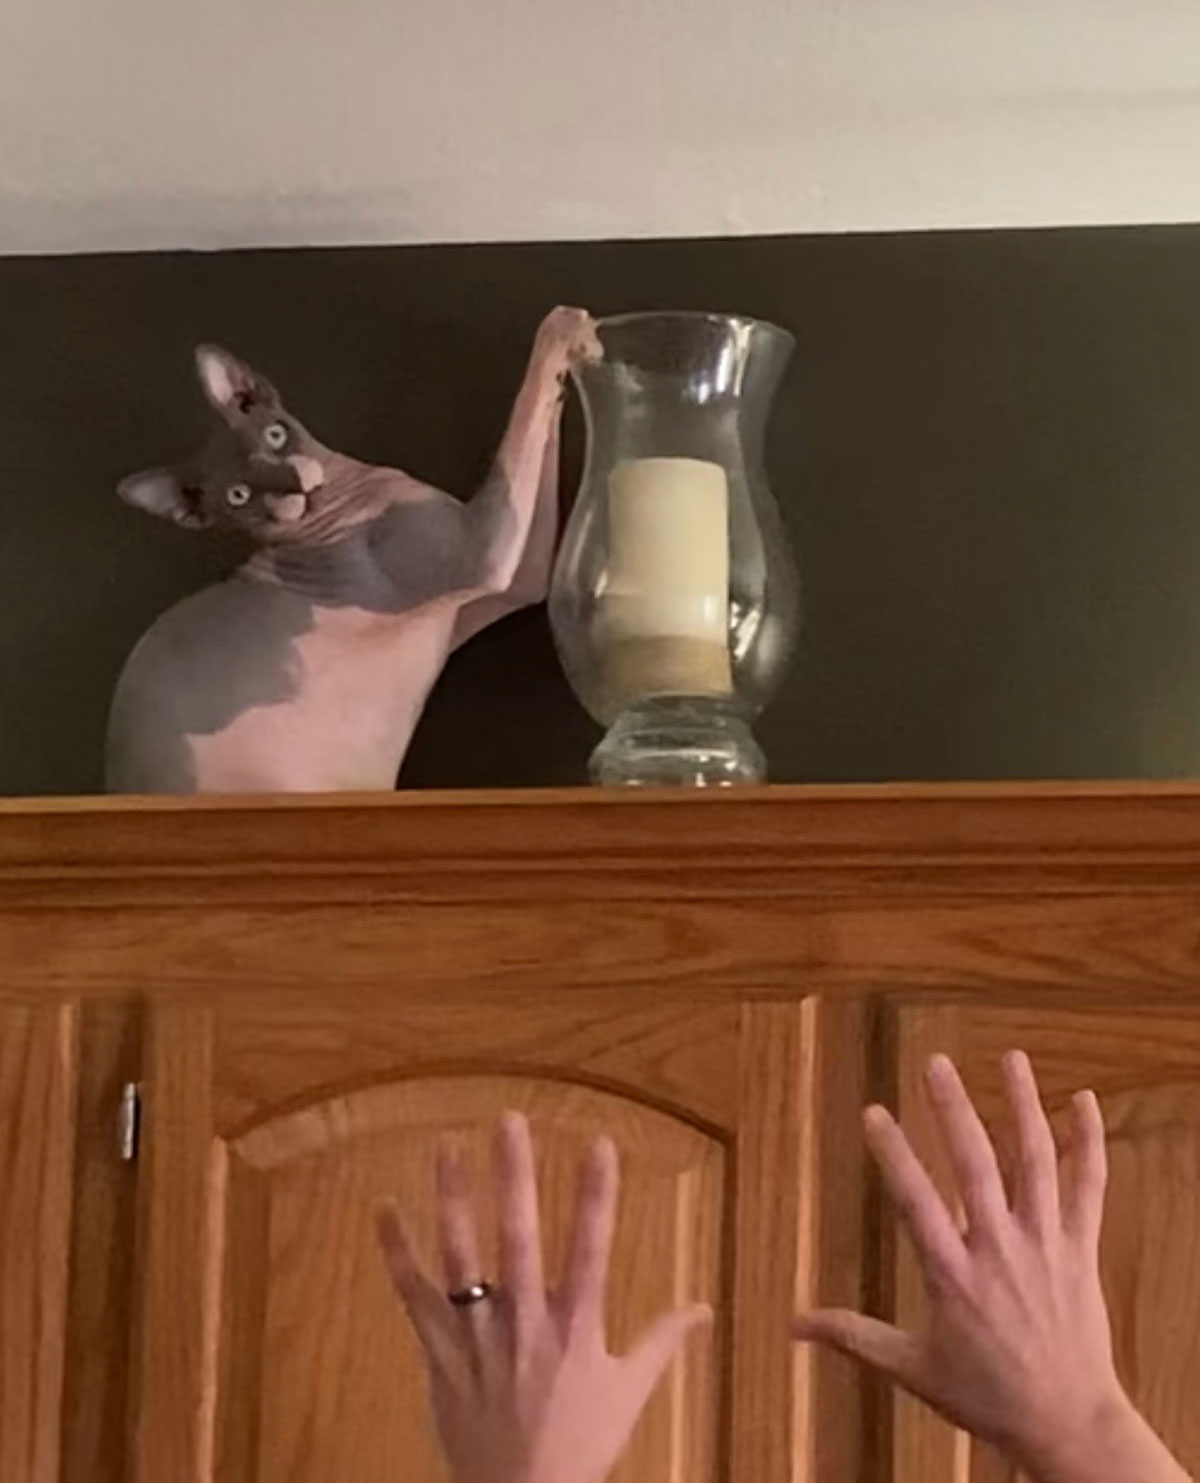 Our cat learned how to get on top of the cabinets